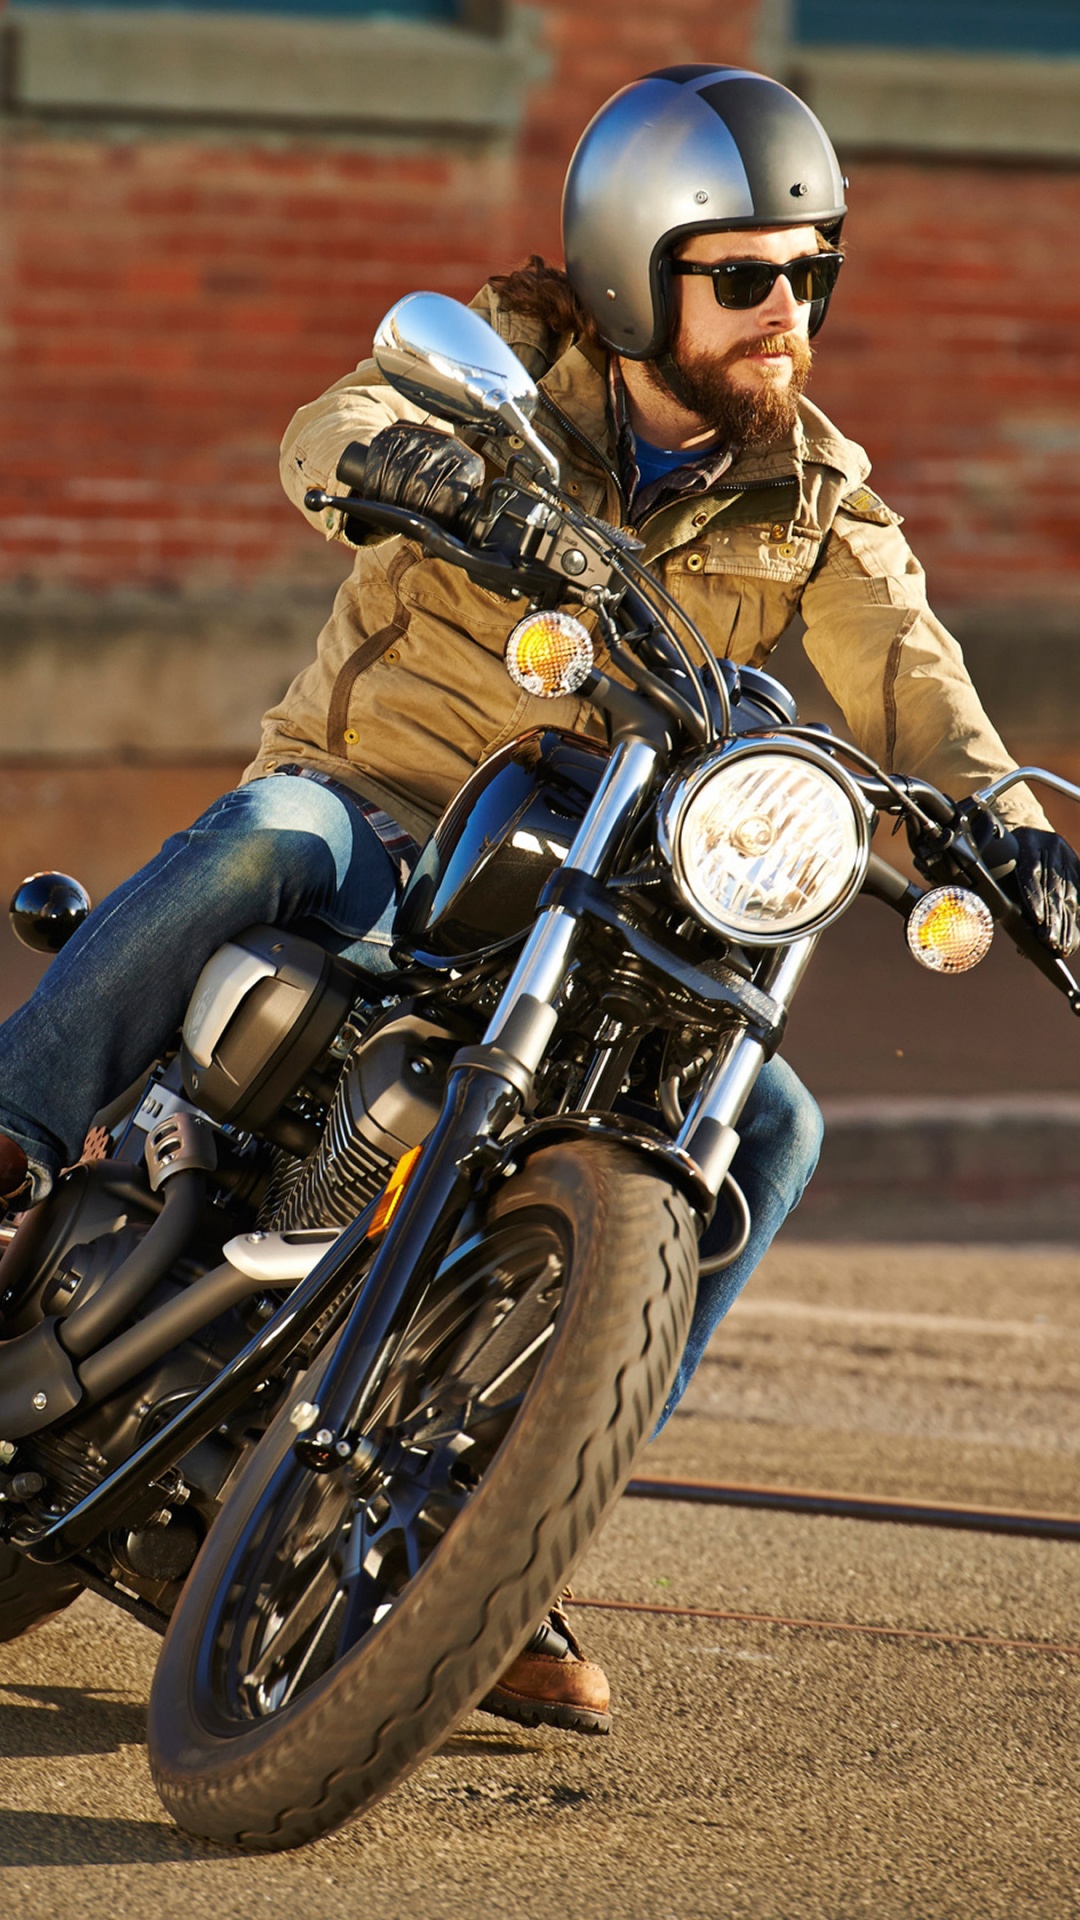 Man in Black Helmet Riding Motorcycle on Road During Daytime. Wallpaper in 1080x1920 Resolution